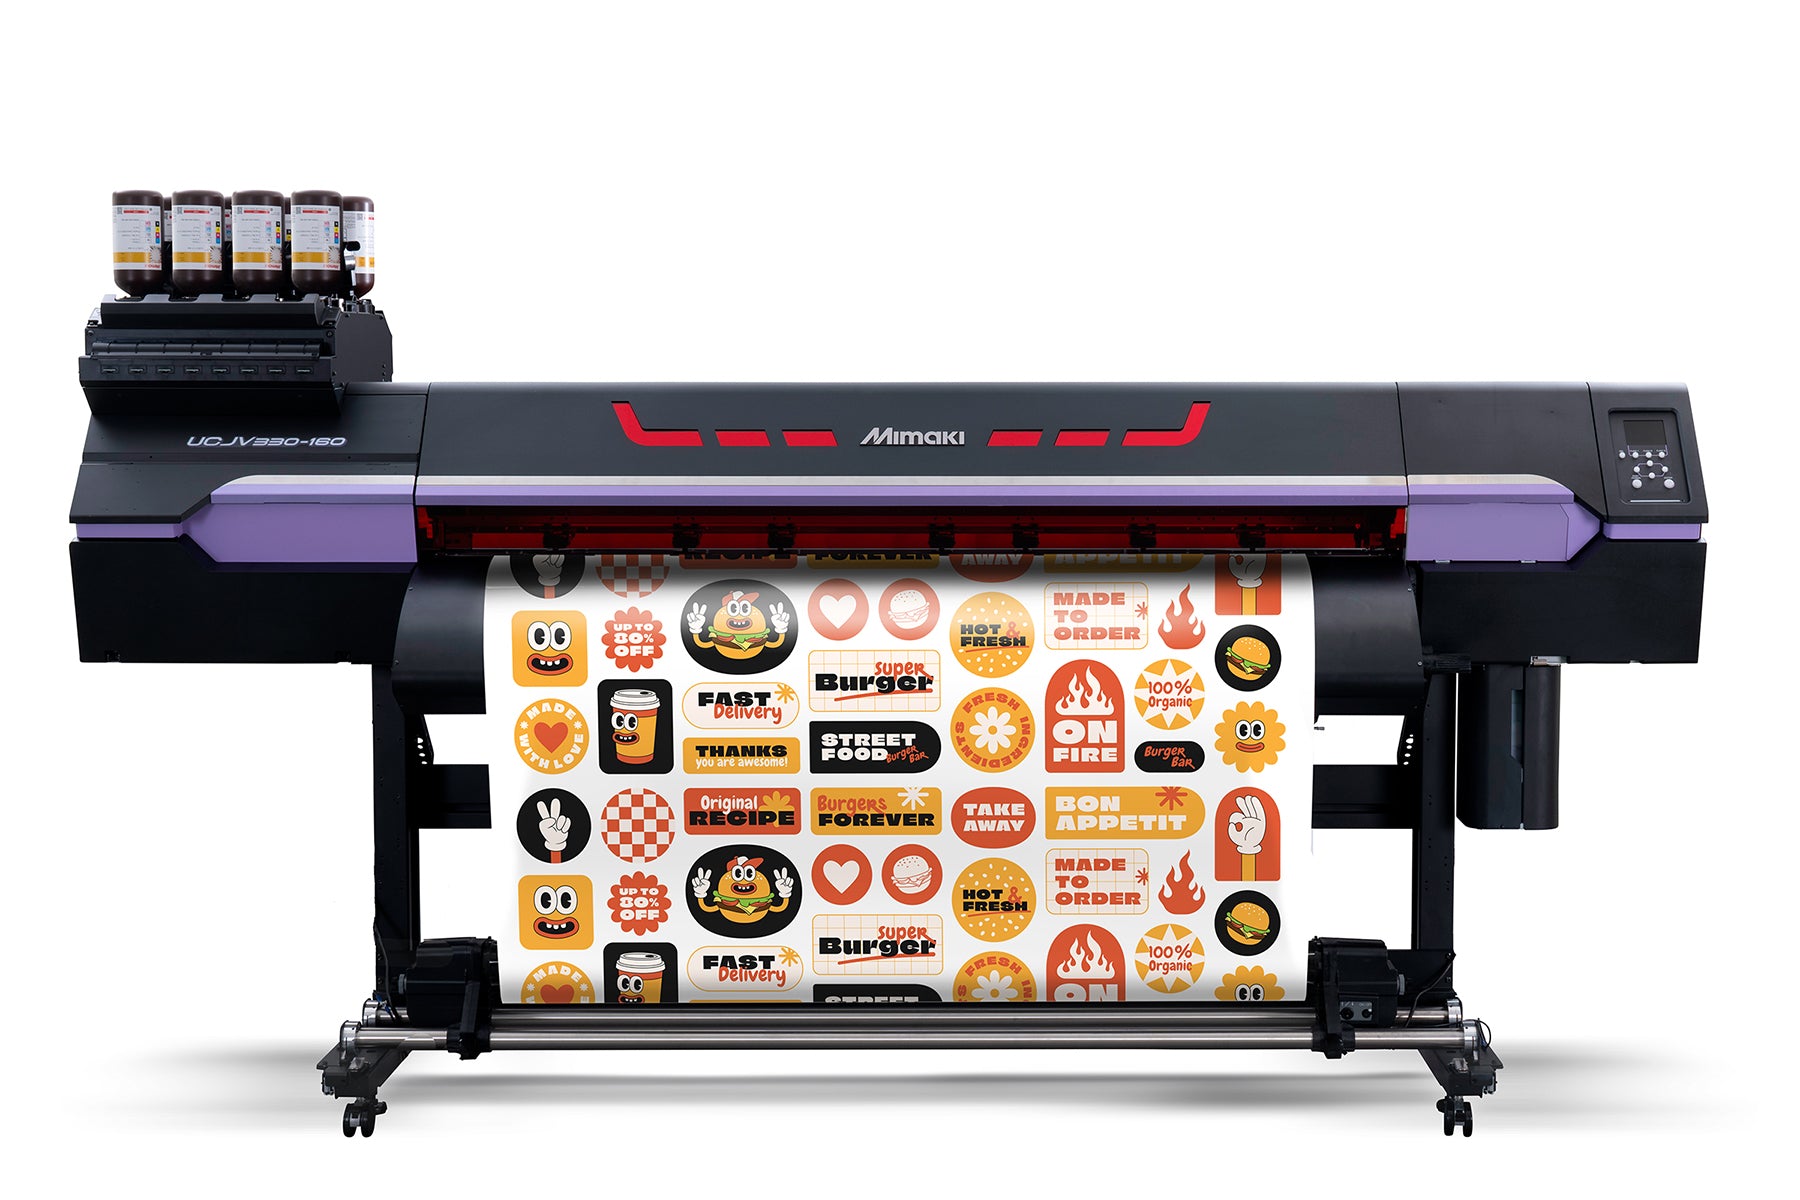 Mimaki UV printed store decals from the ucjv330